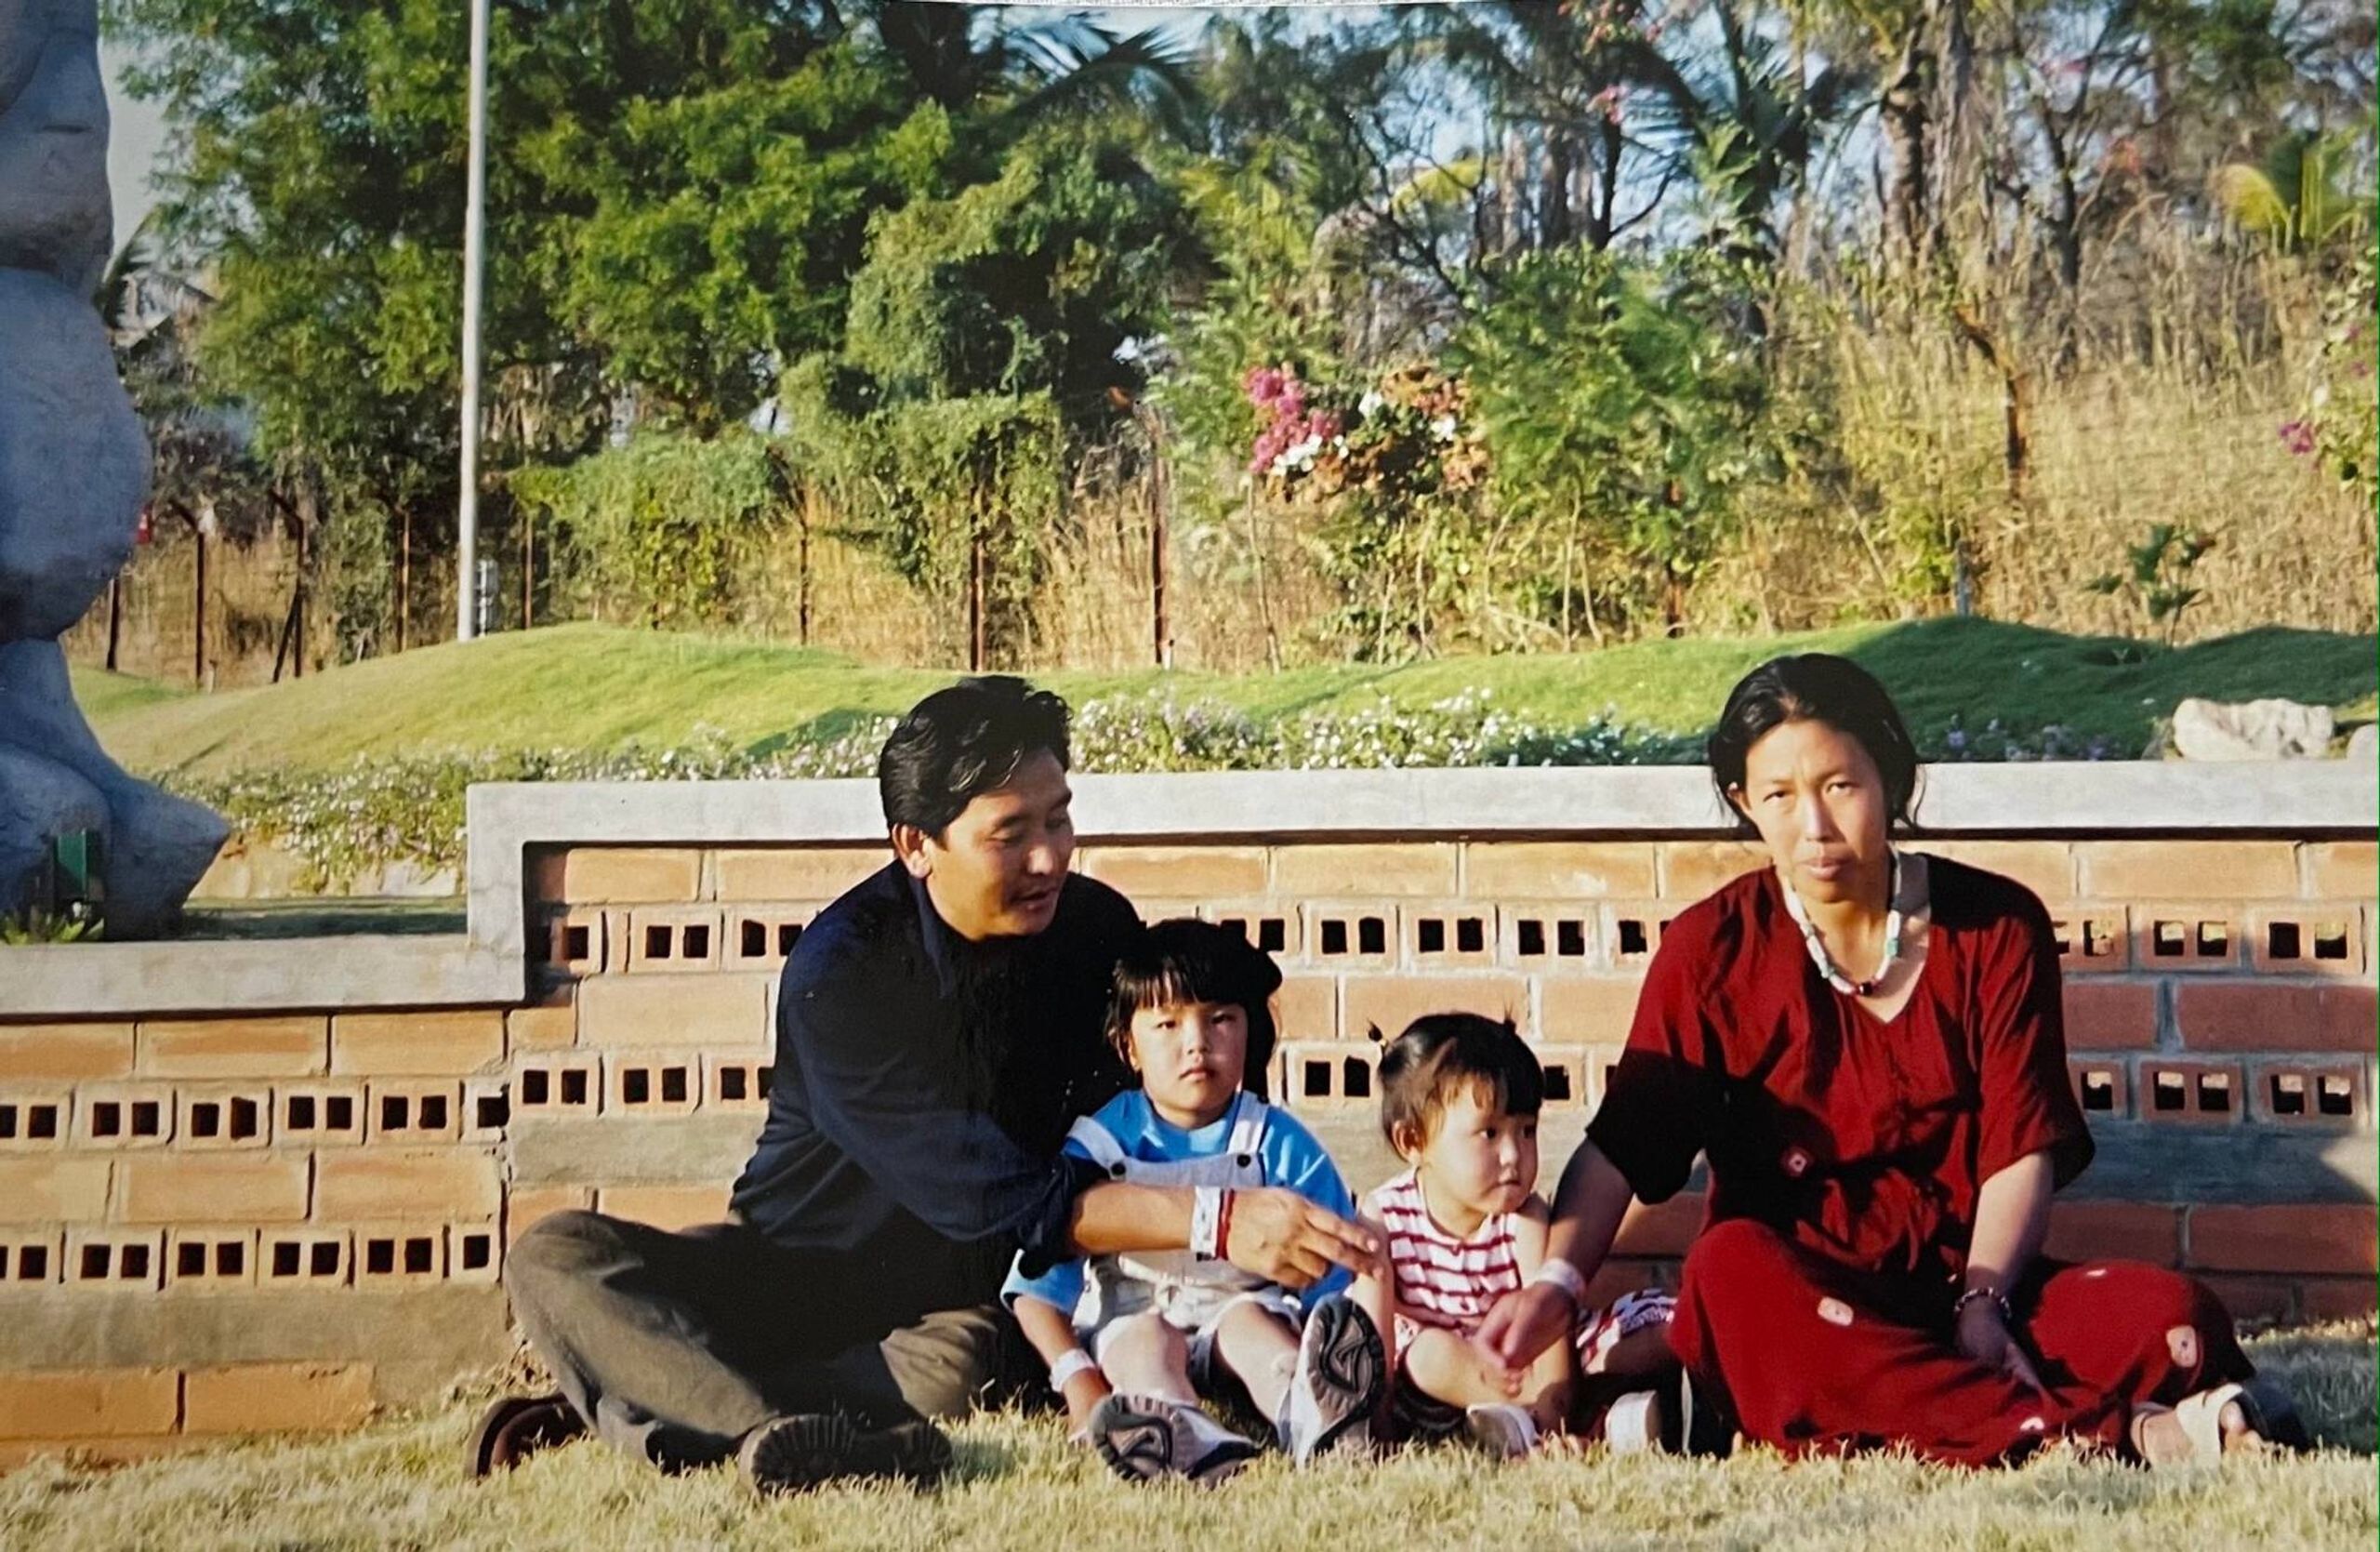 Two parents and two children seated at a park